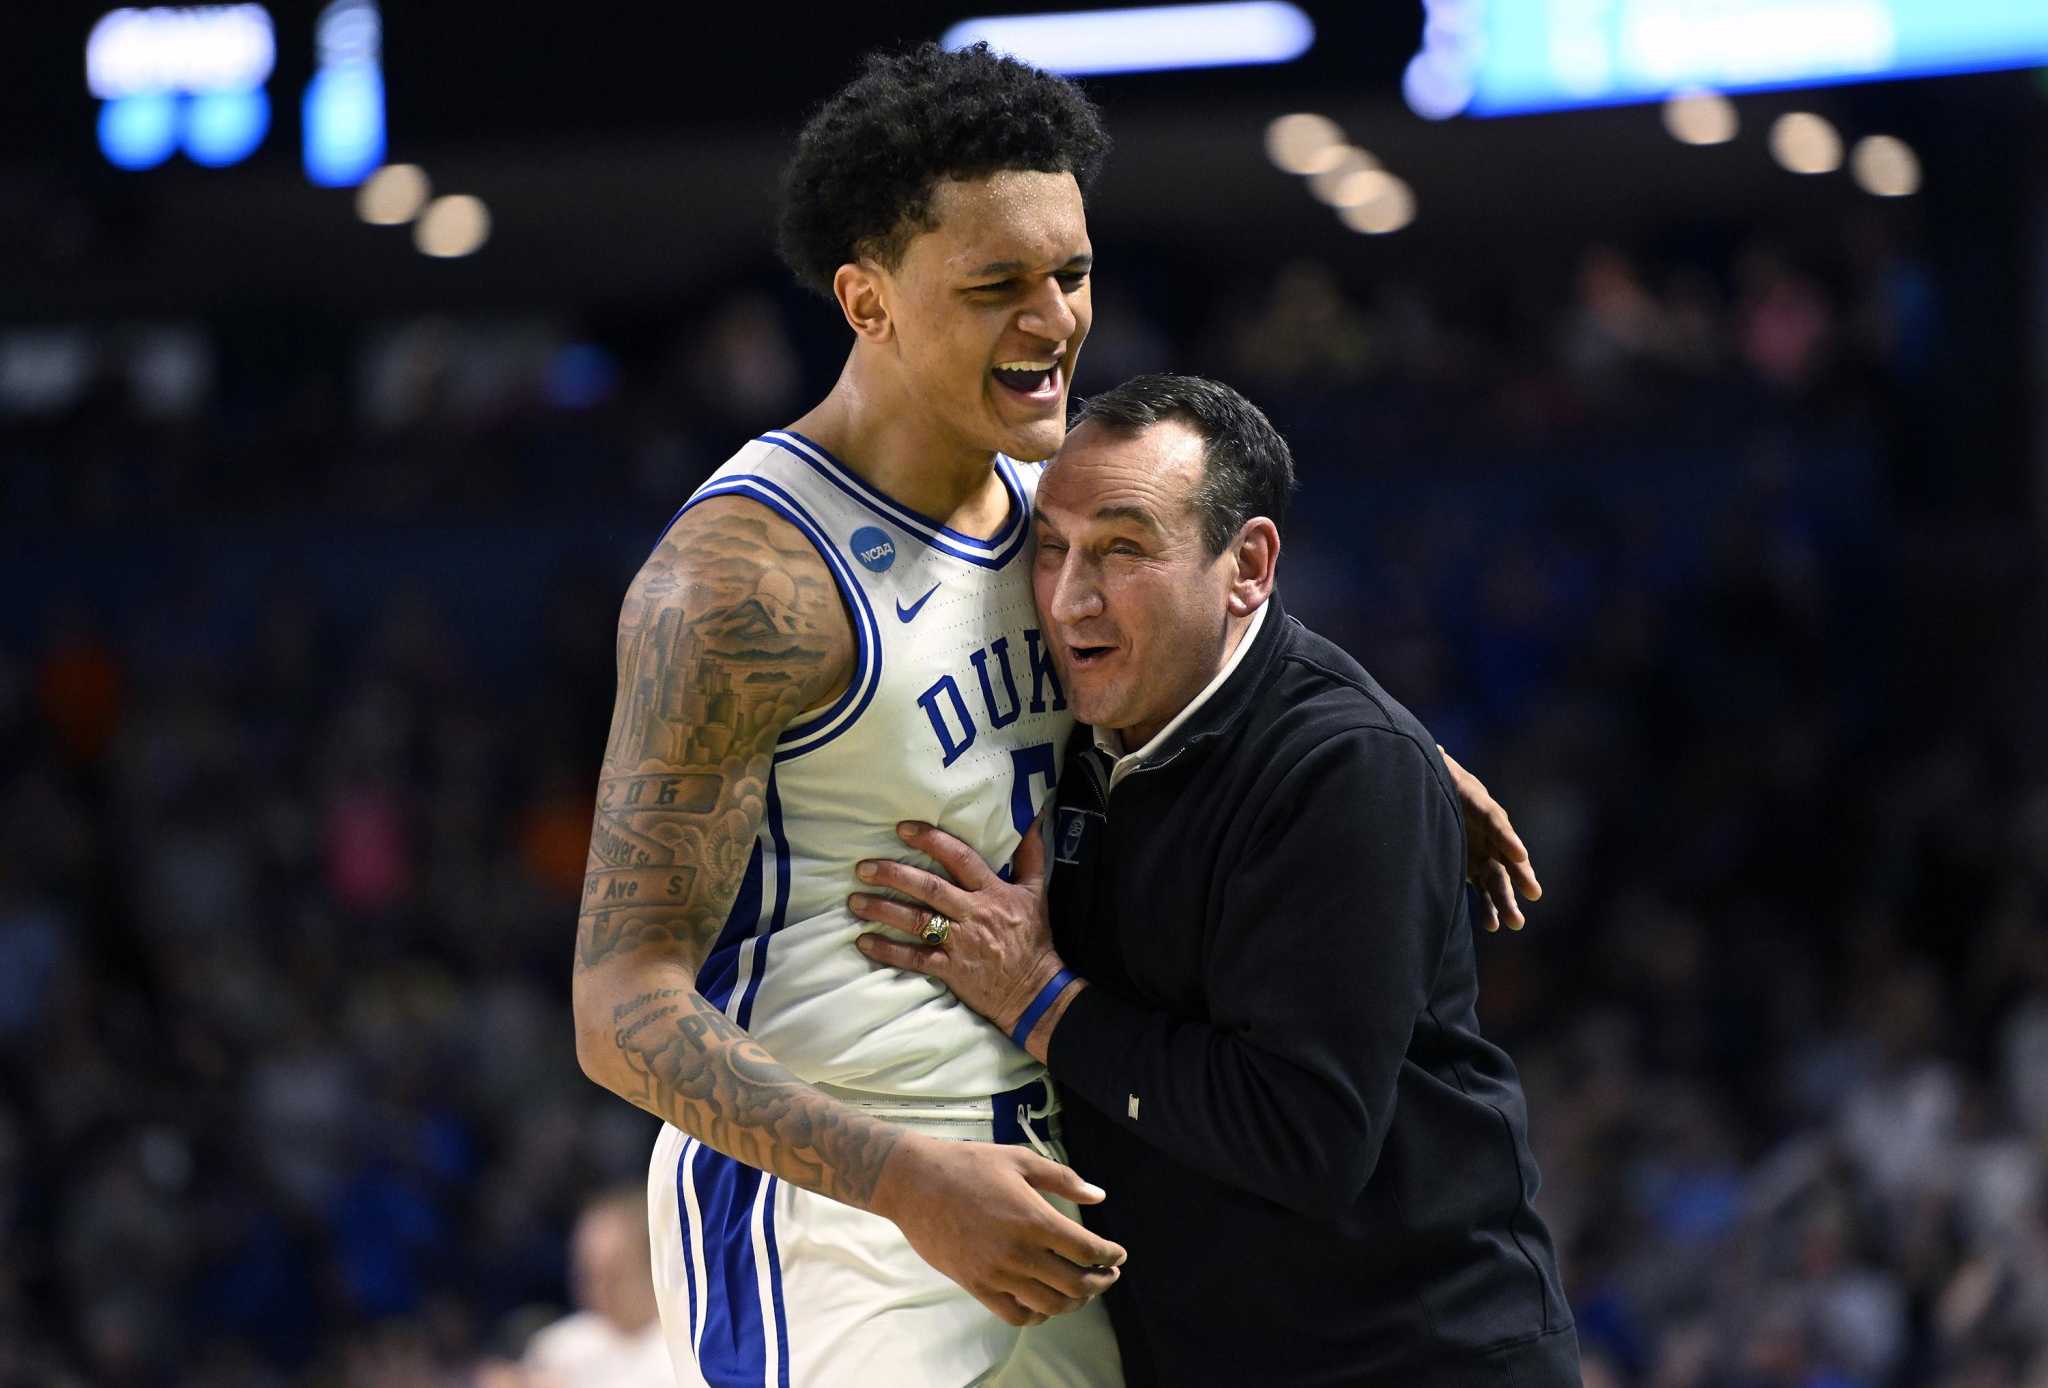 Coach K Discussed His Health Thursday. So How's He Doing? - Duke Basketball  Report